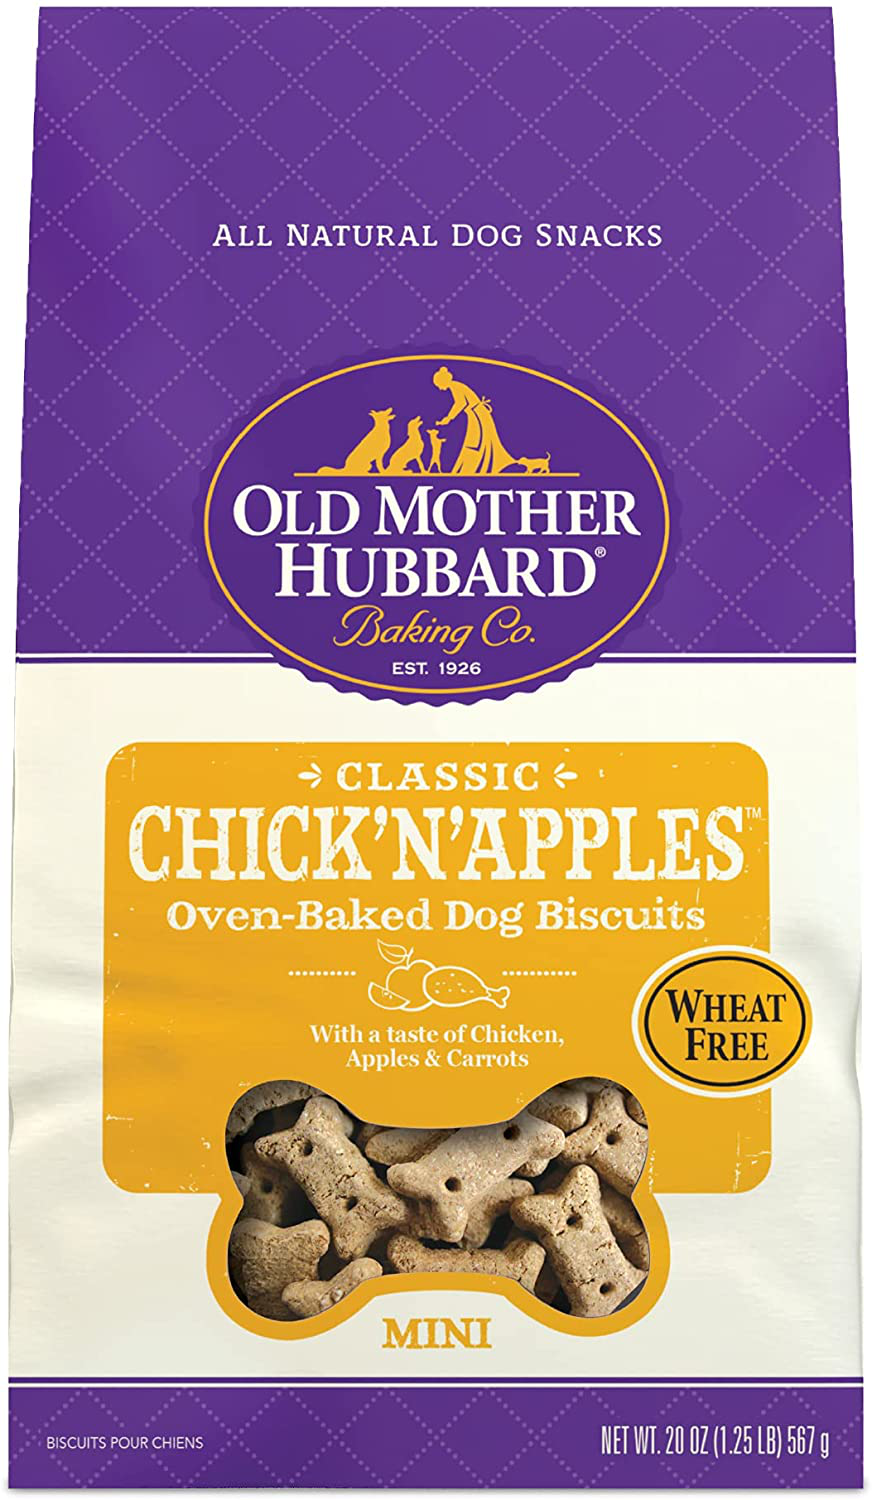 Old Mother Hubbard Classic Natural Dog Treats, Chicken and Apples, Oven Baked, Crunchy Dog Treats, Mini Training Treats, Small Dogs, No Artificial Preservatives, Wheat Free Animals & Pet Supplies > Pet Supplies > Dog Supplies > Dog Treats Old Mother Hubbard 20 Ounce Bag (Pack of 1)  